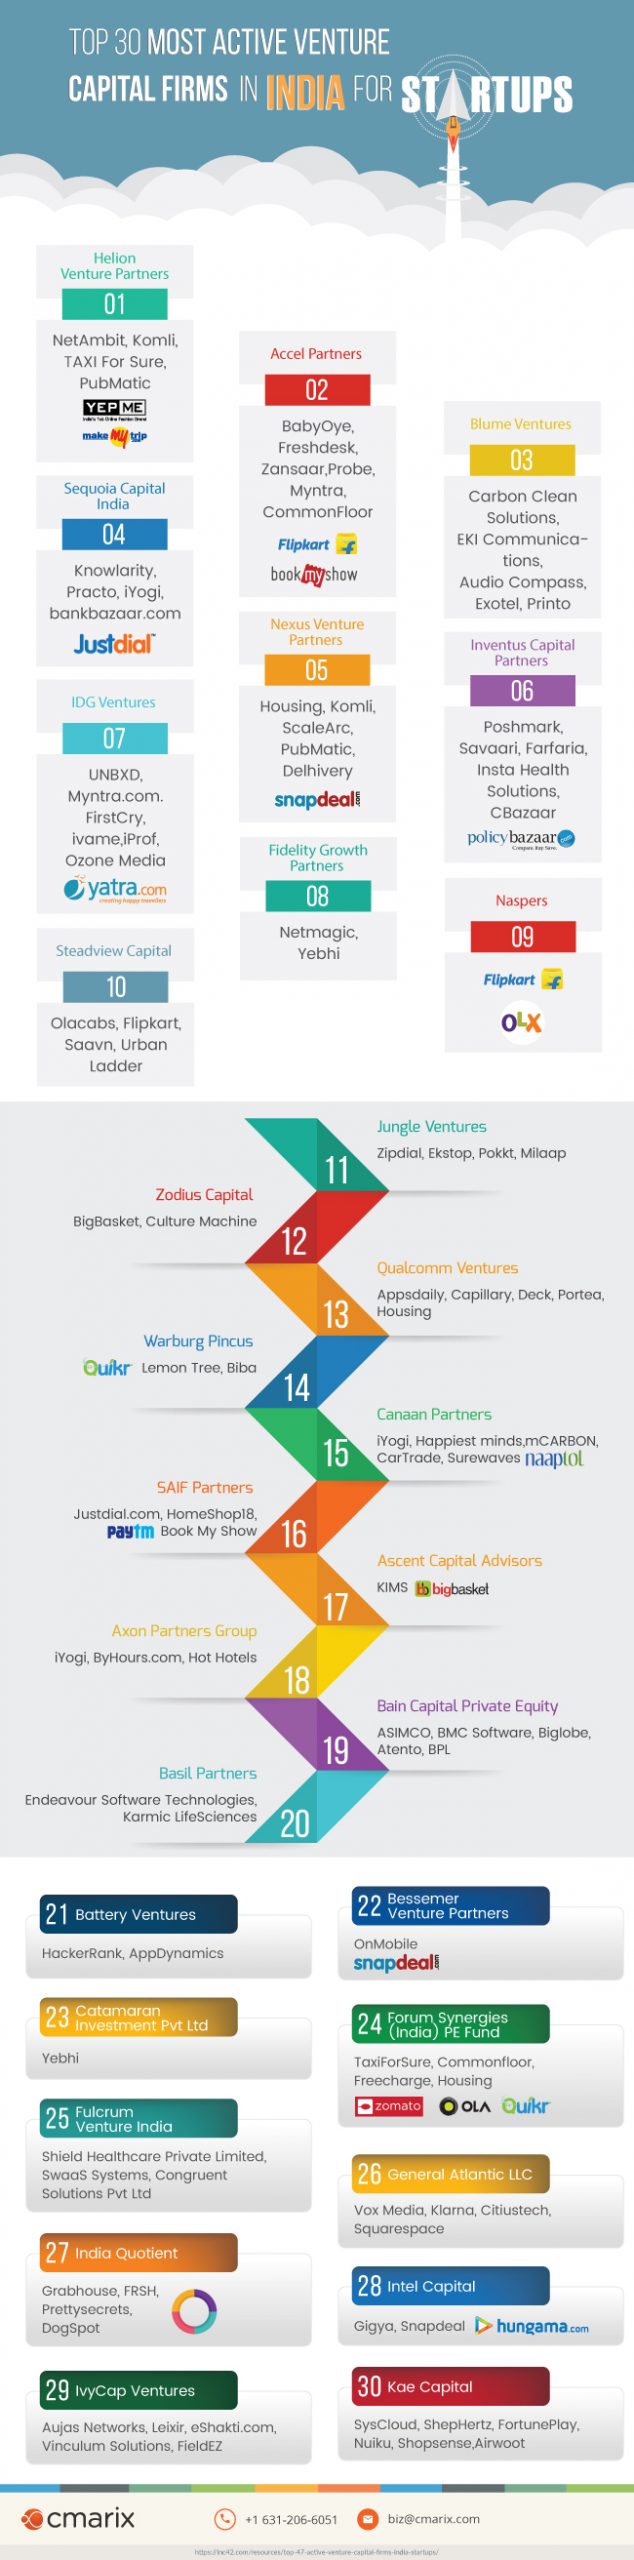 Top 30 Venture Capital Firms in India for Startups